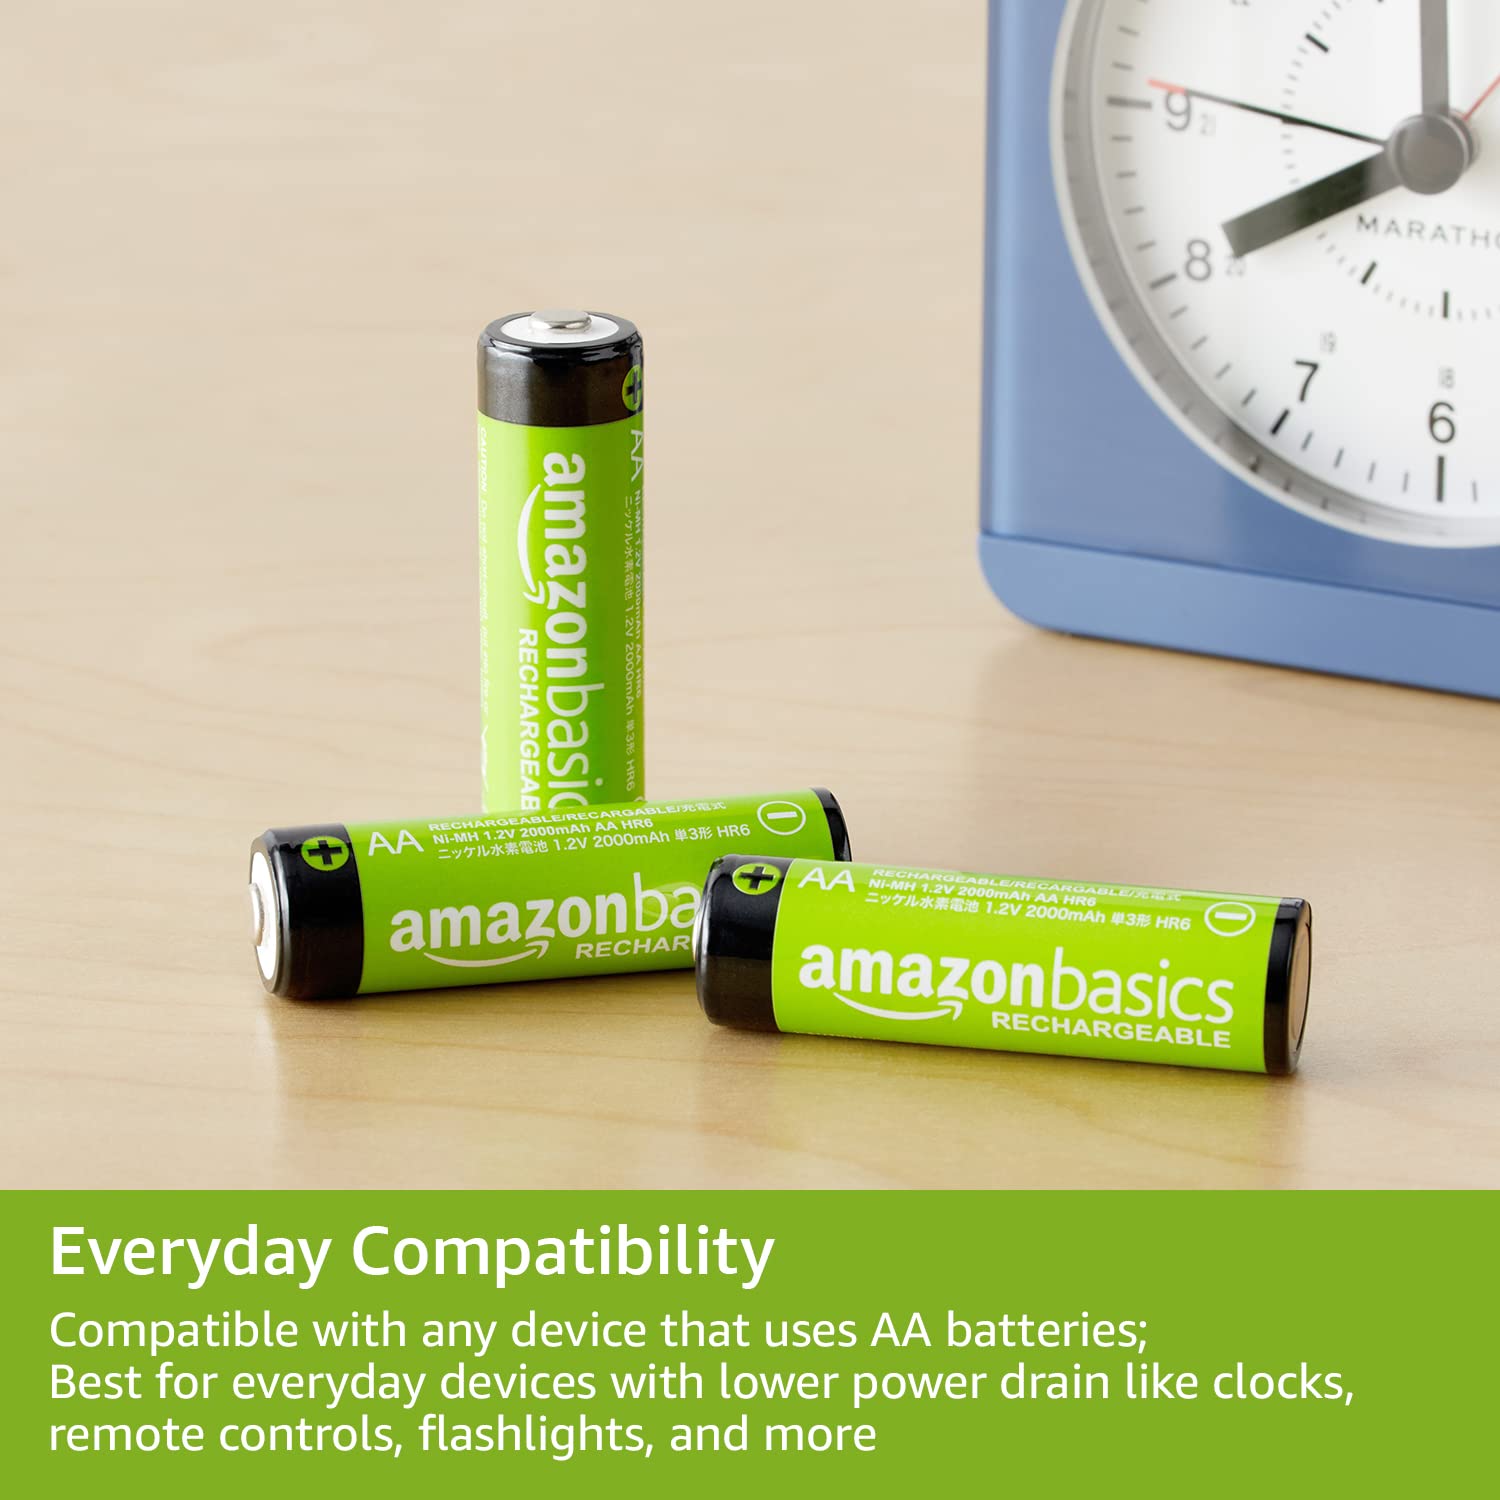 Amazon Basics 16-Pack Rechargeable AA NiMH Batteries, 2000 mAh, Recharge up to 1000x Times, Pre-Charged